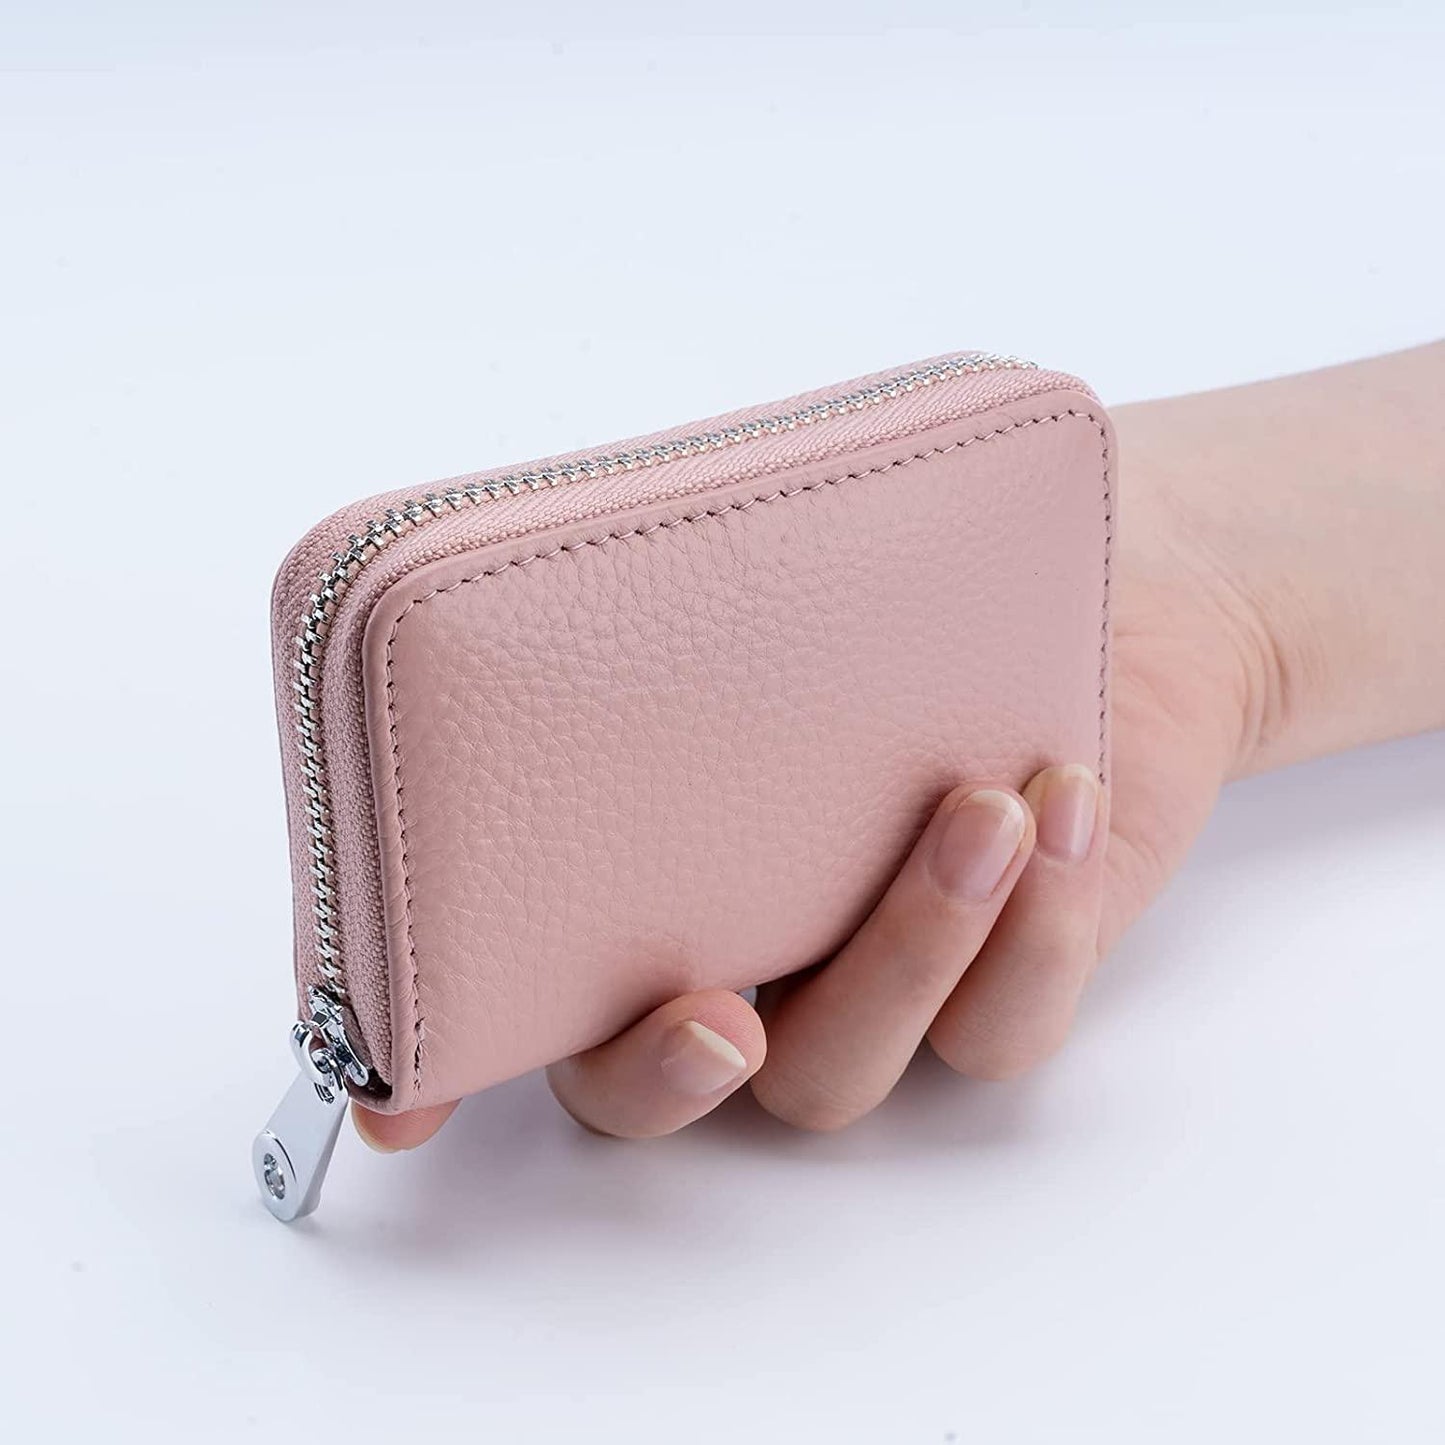 Credit Card Holder RFID Blocking Genuine Leather Mini Credit Card Wallet Purse with Zipper Womens Small id Compact Slim Blocked Zip Accordion Wallets Case for Women Men's Wintory